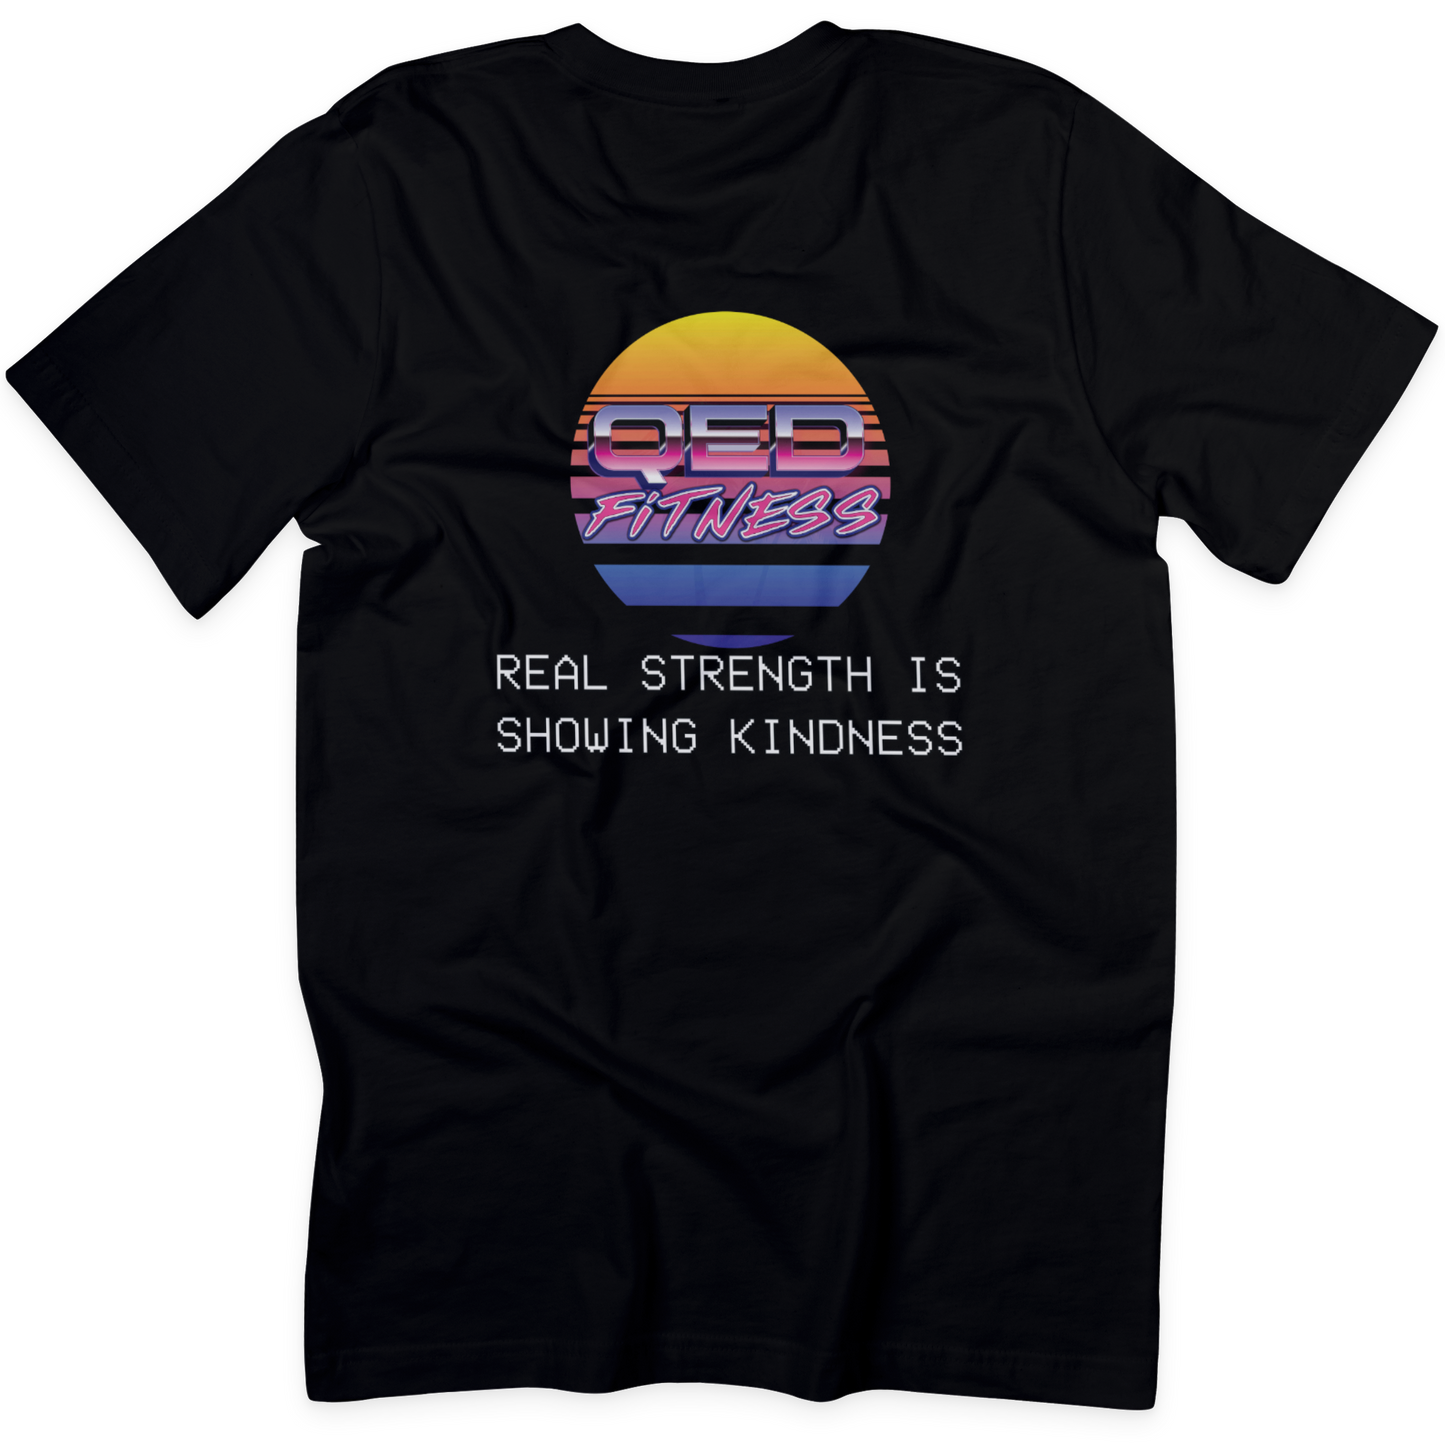 Real Strength is Showing Kindness T-shirt